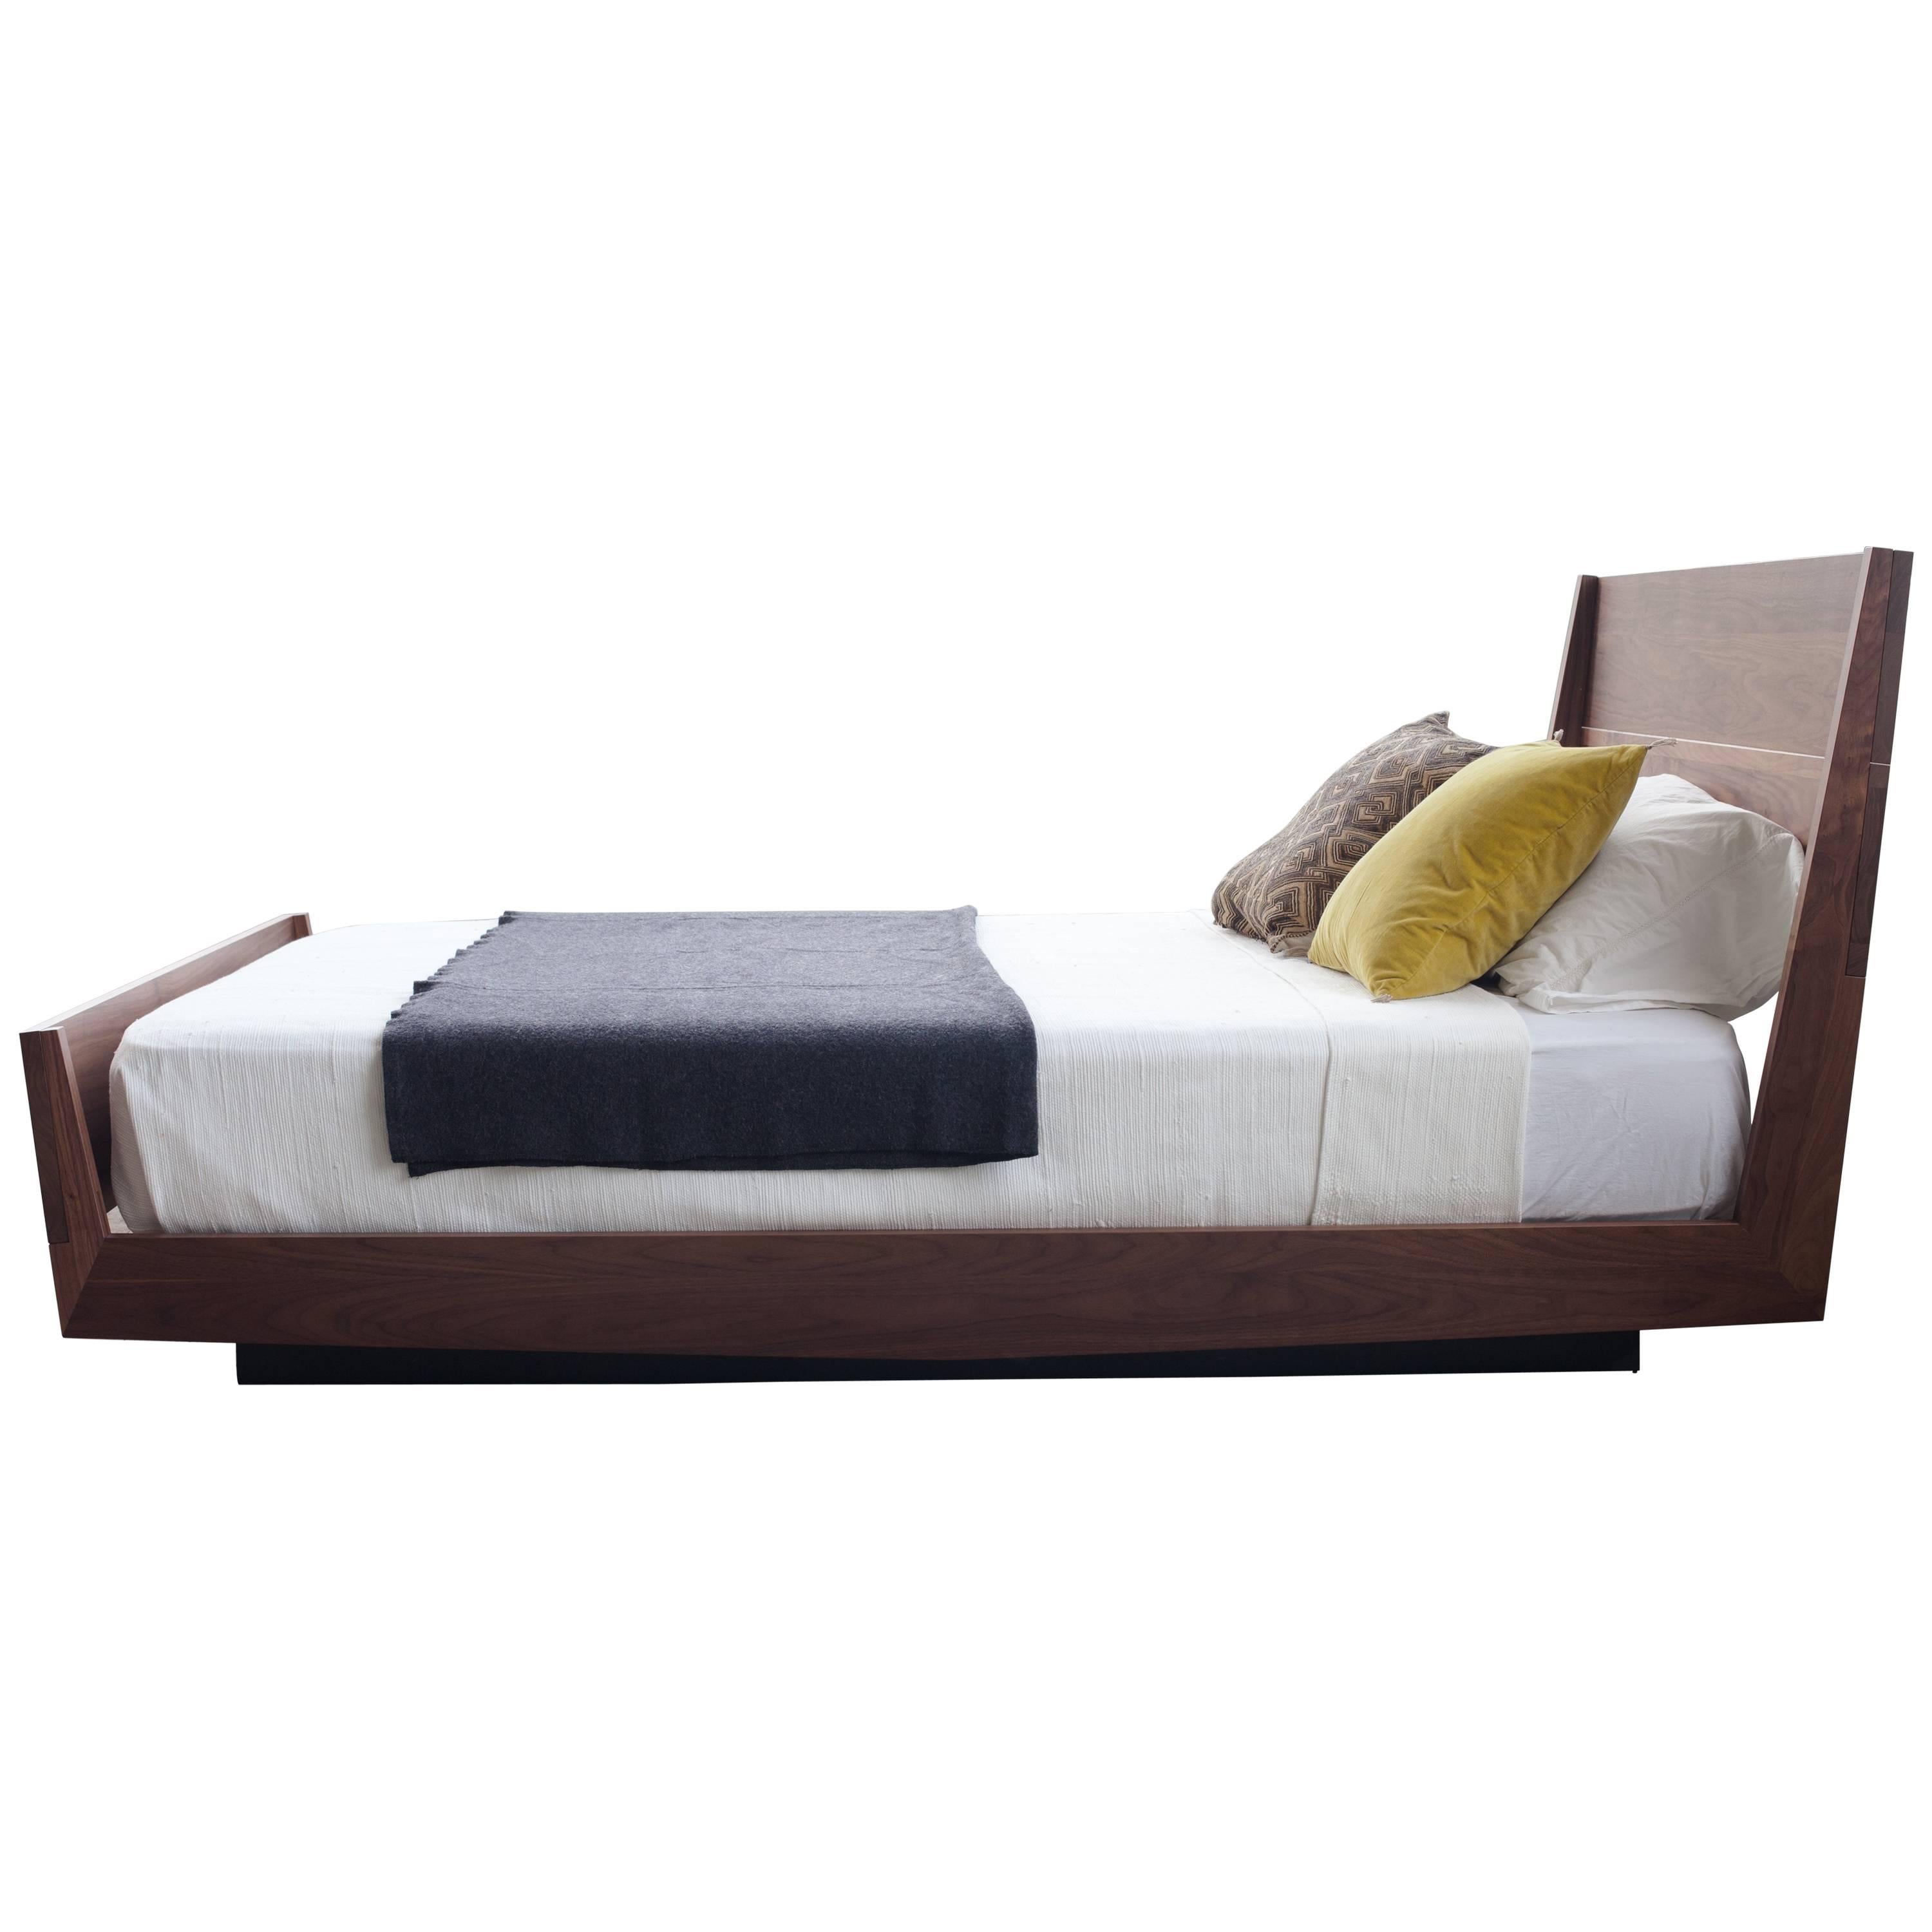 AB5 - Queen Size Contemporary Walnut Floating Platform Bed For Sale